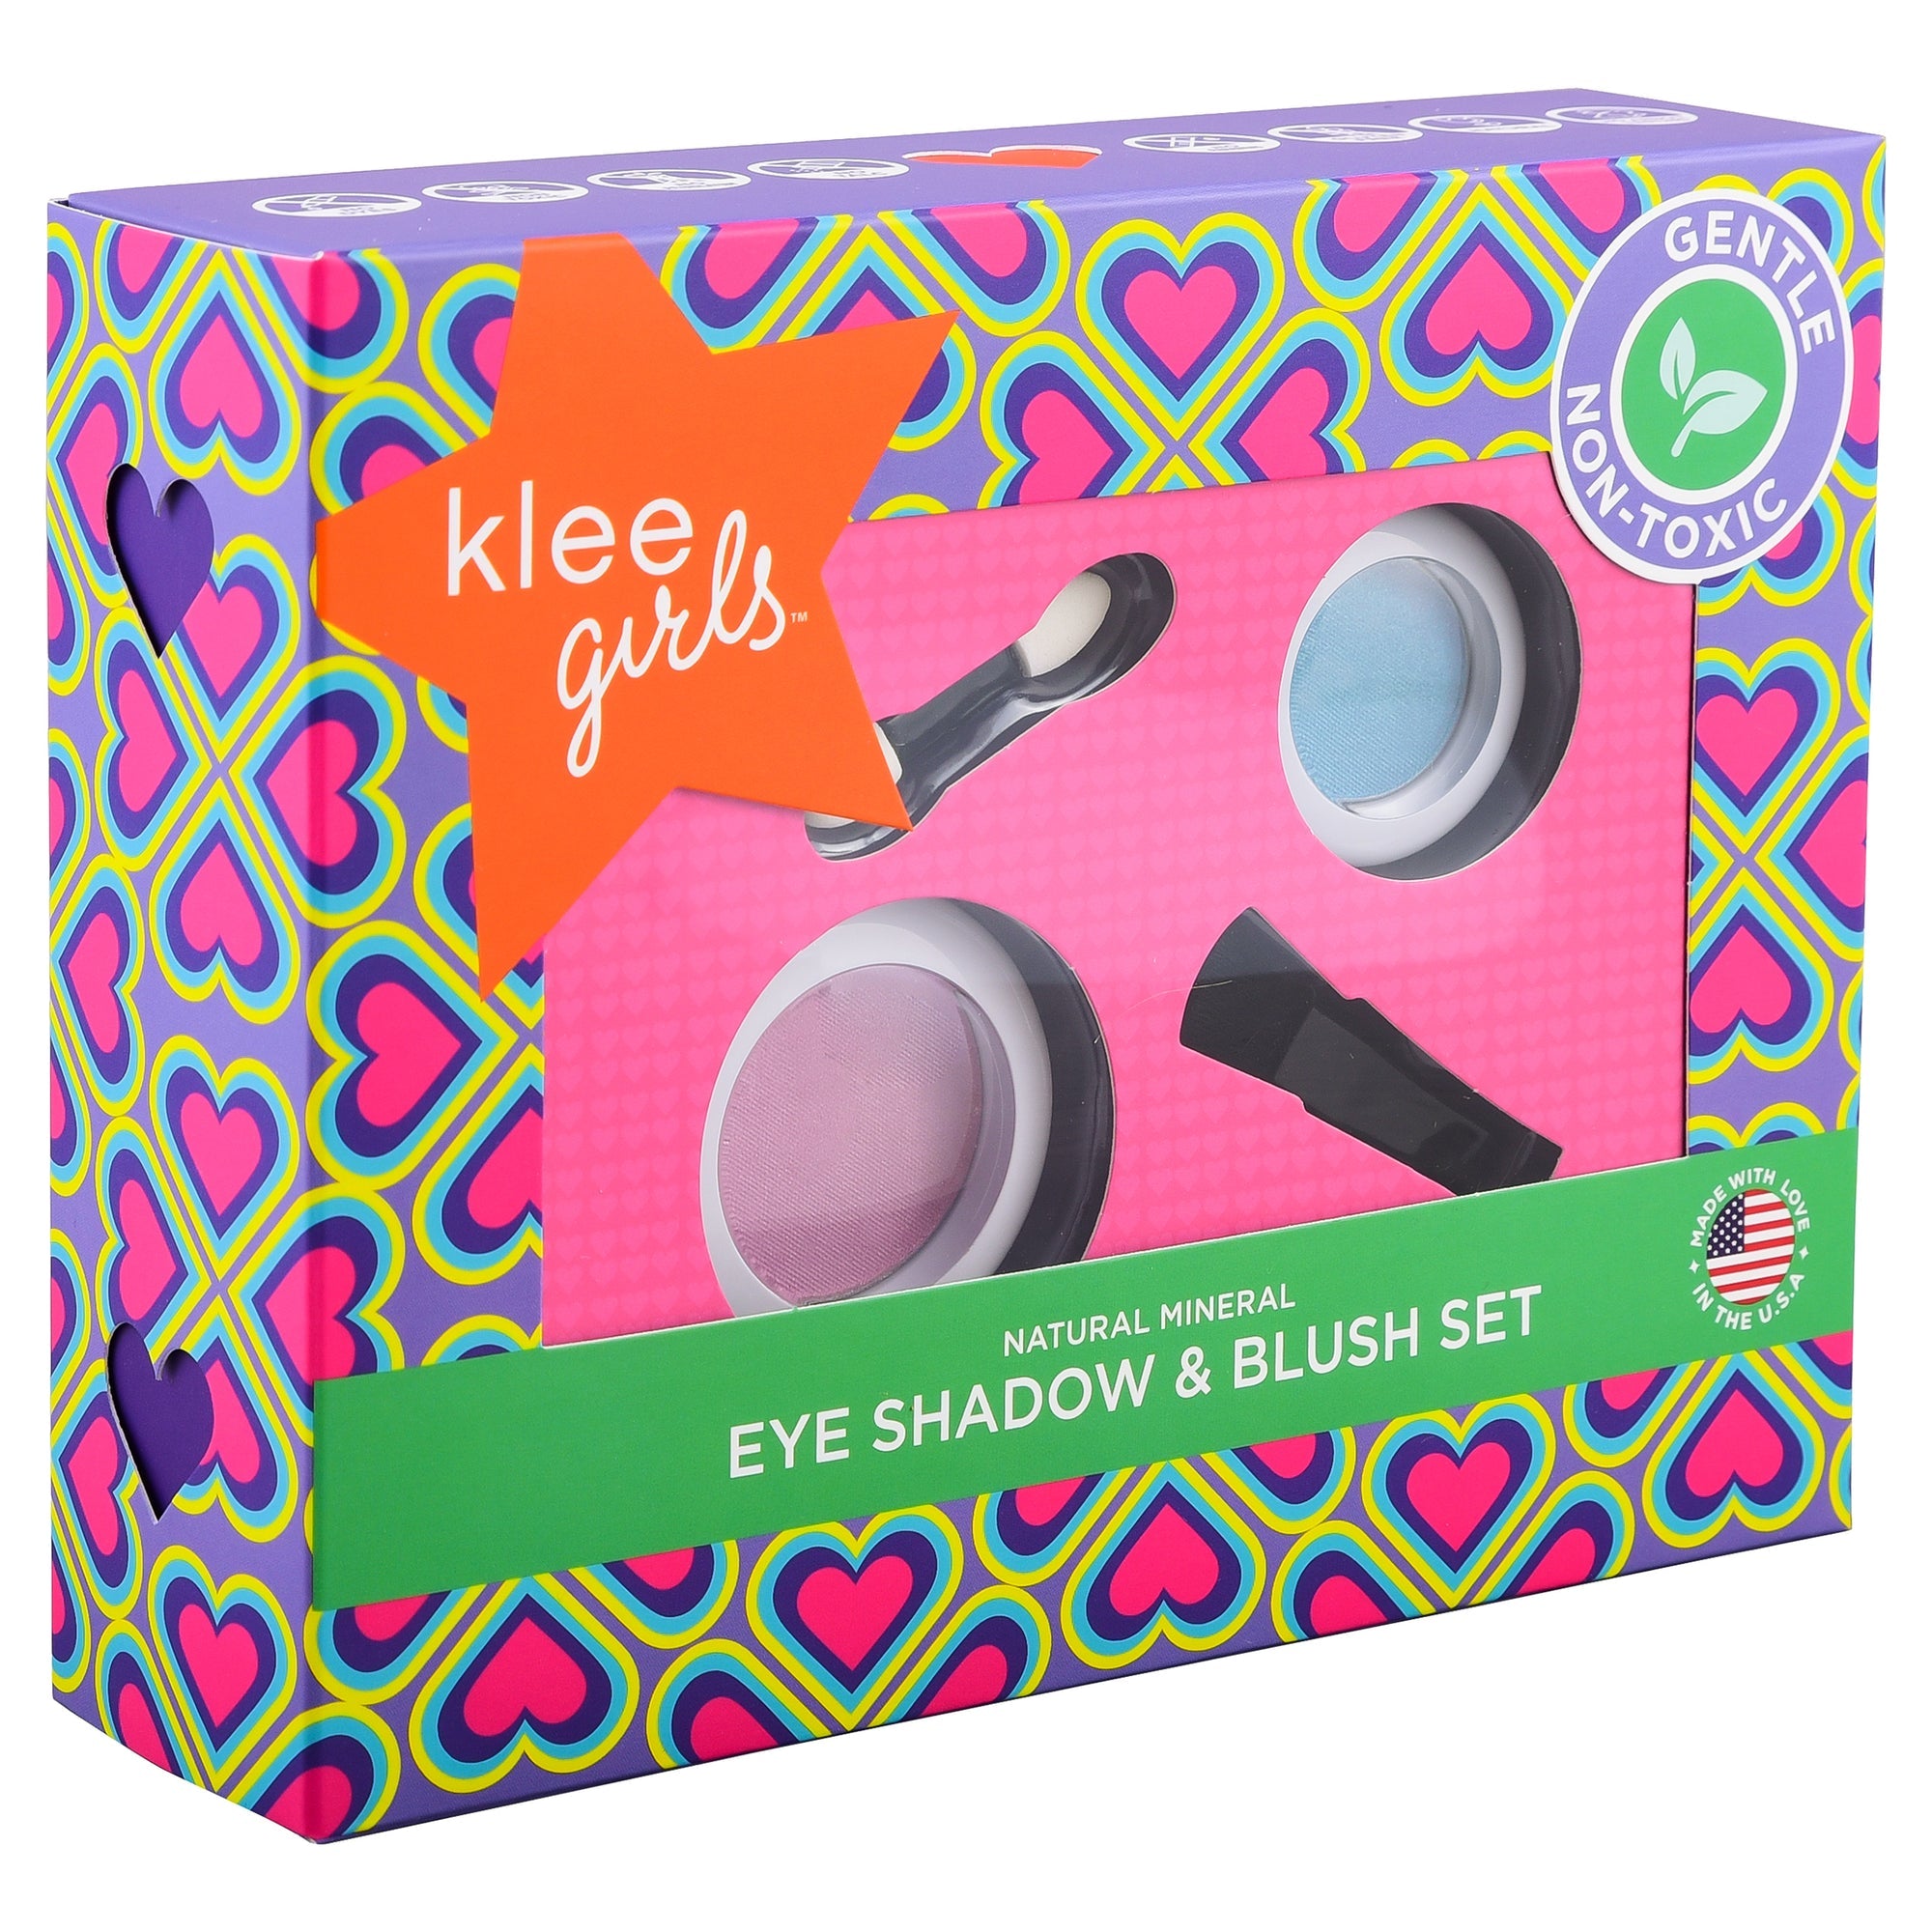 Klee Girls Eyeshadow and Blush Set - Wink and Smile